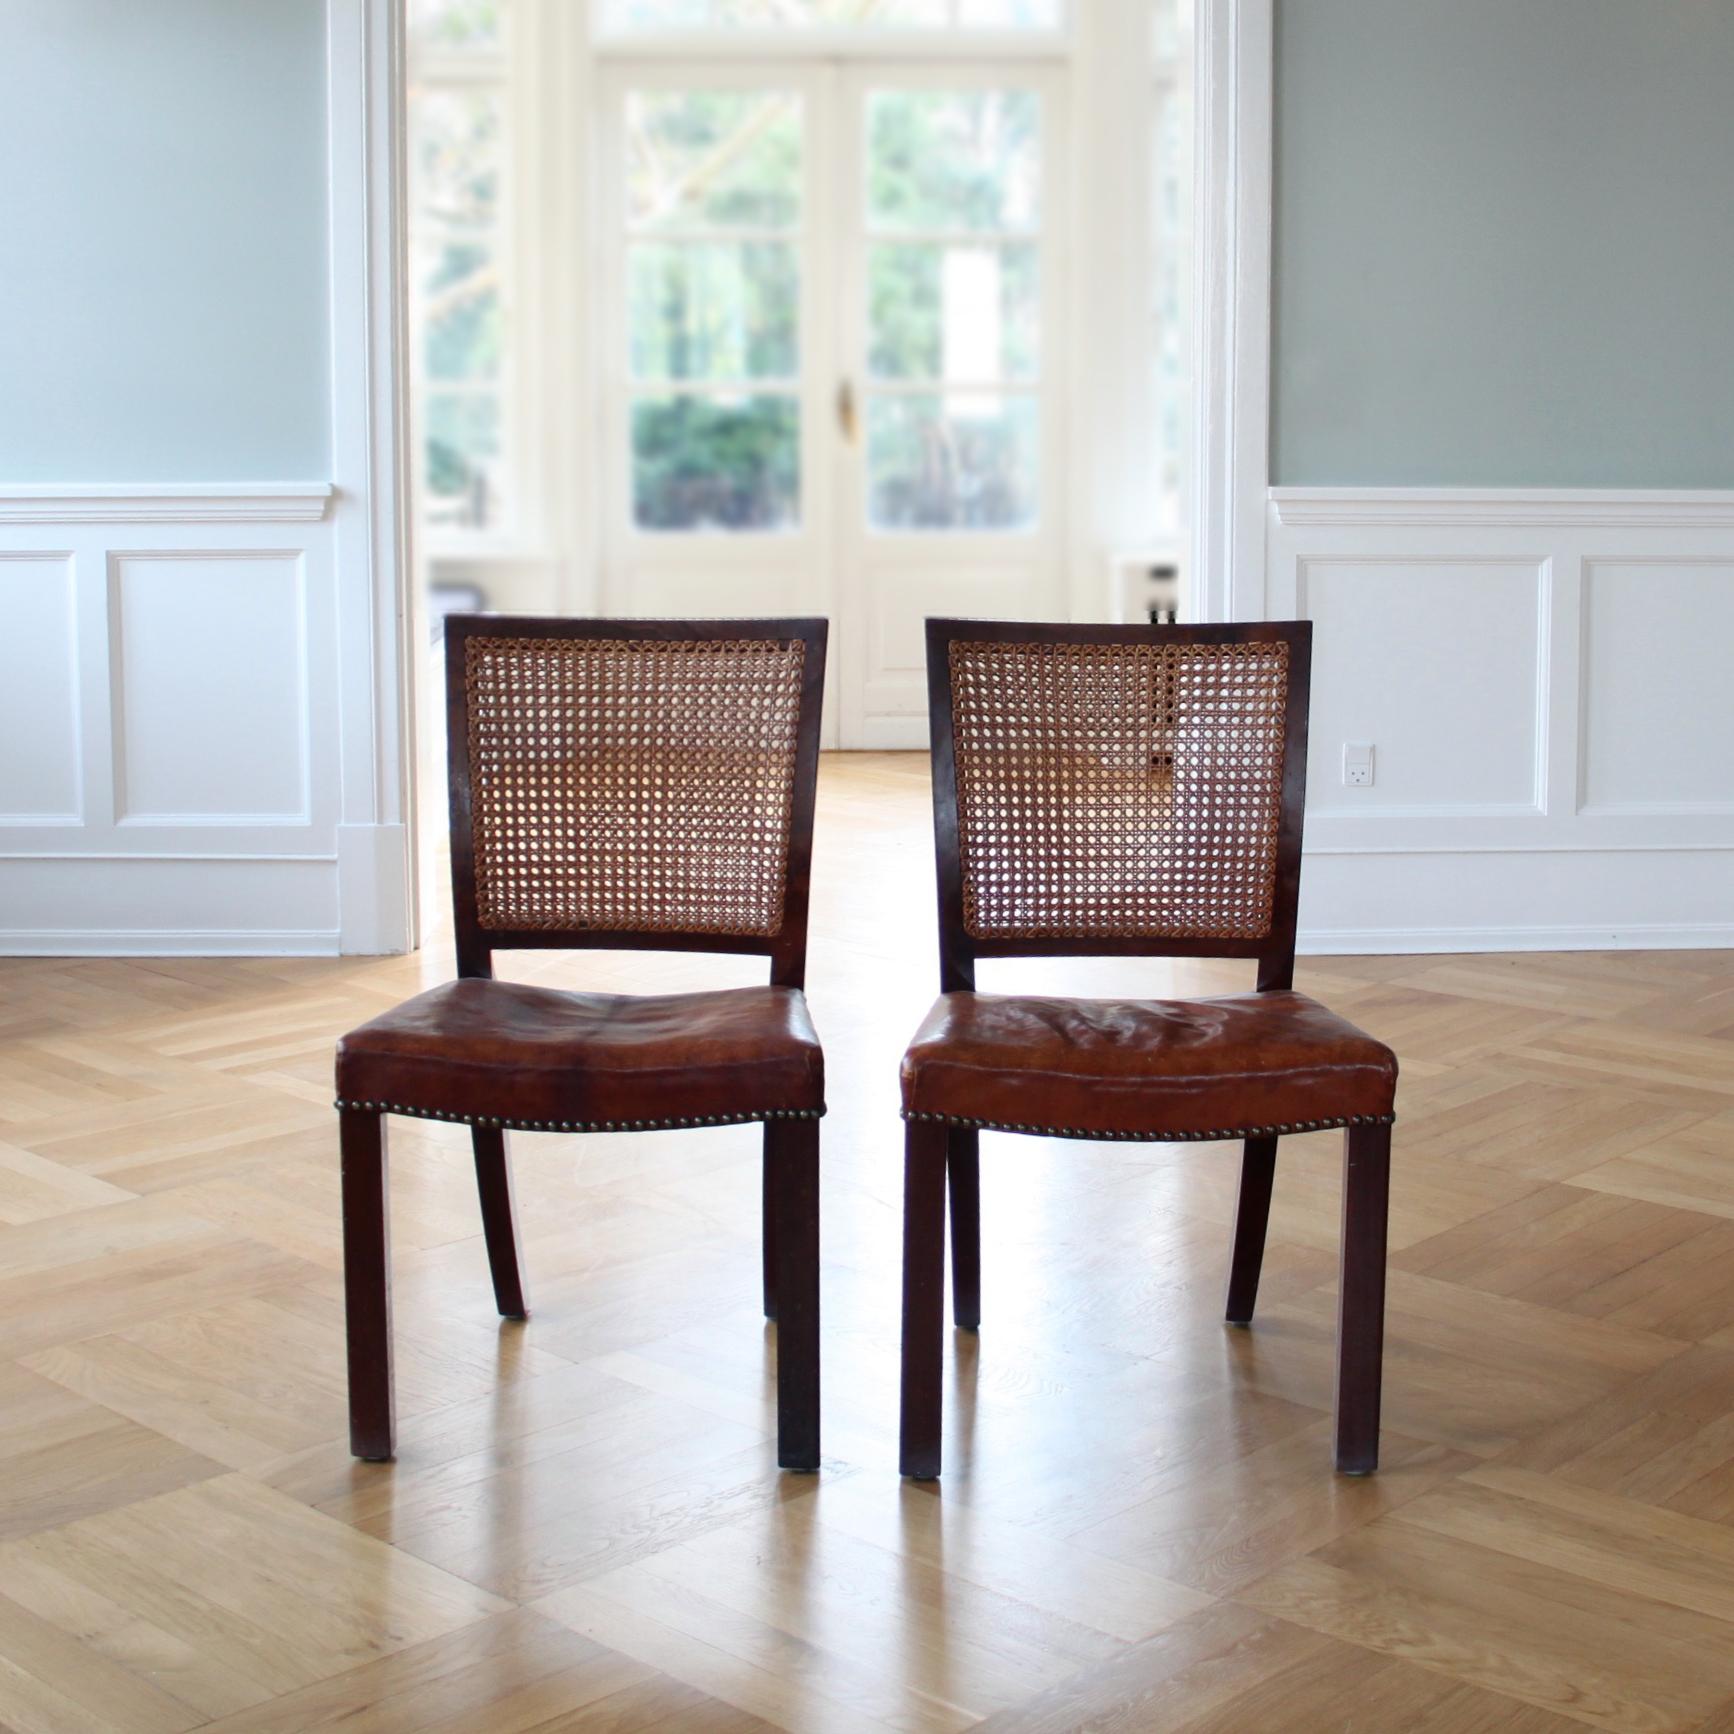 Rare pair of Mahogany, Niger Leather and Woven Cane Chairs, Denmark 1930s In Good Condition For Sale In Copenhagen, DK